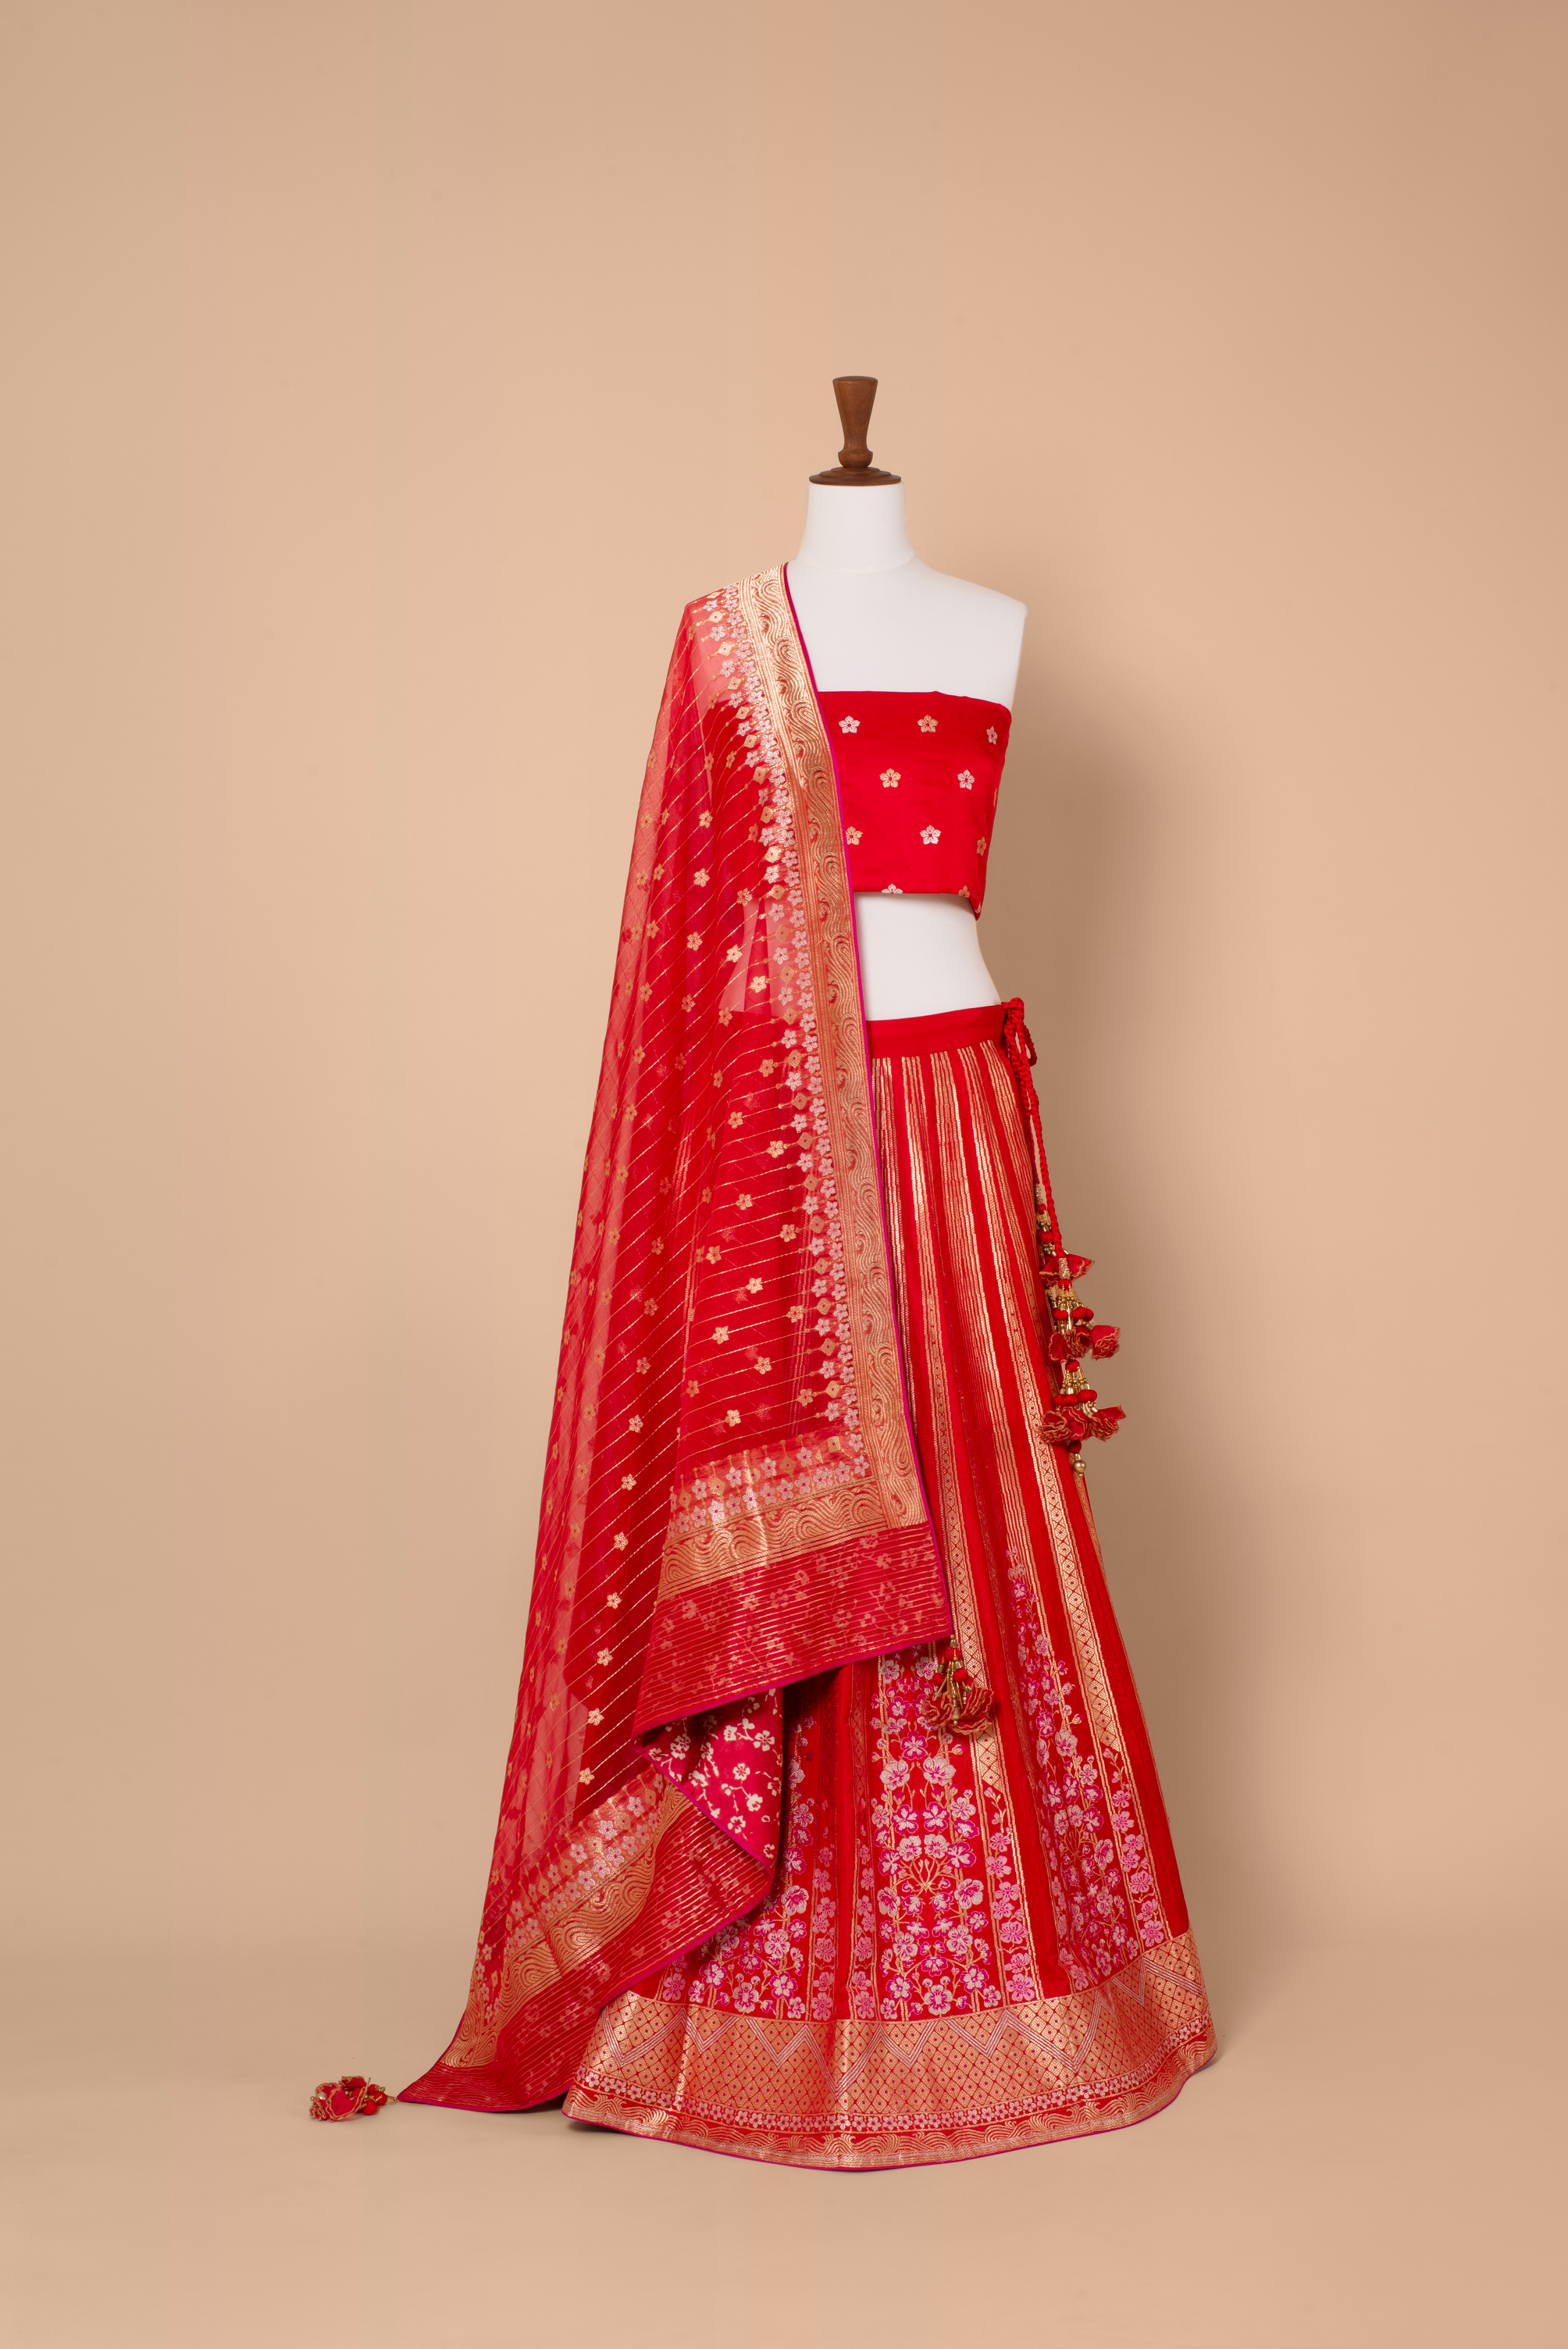 Miraculous Digital Printed Oraganza Silk Party Ware Lehenga Choli Along  With Stitched Patterned Blouse